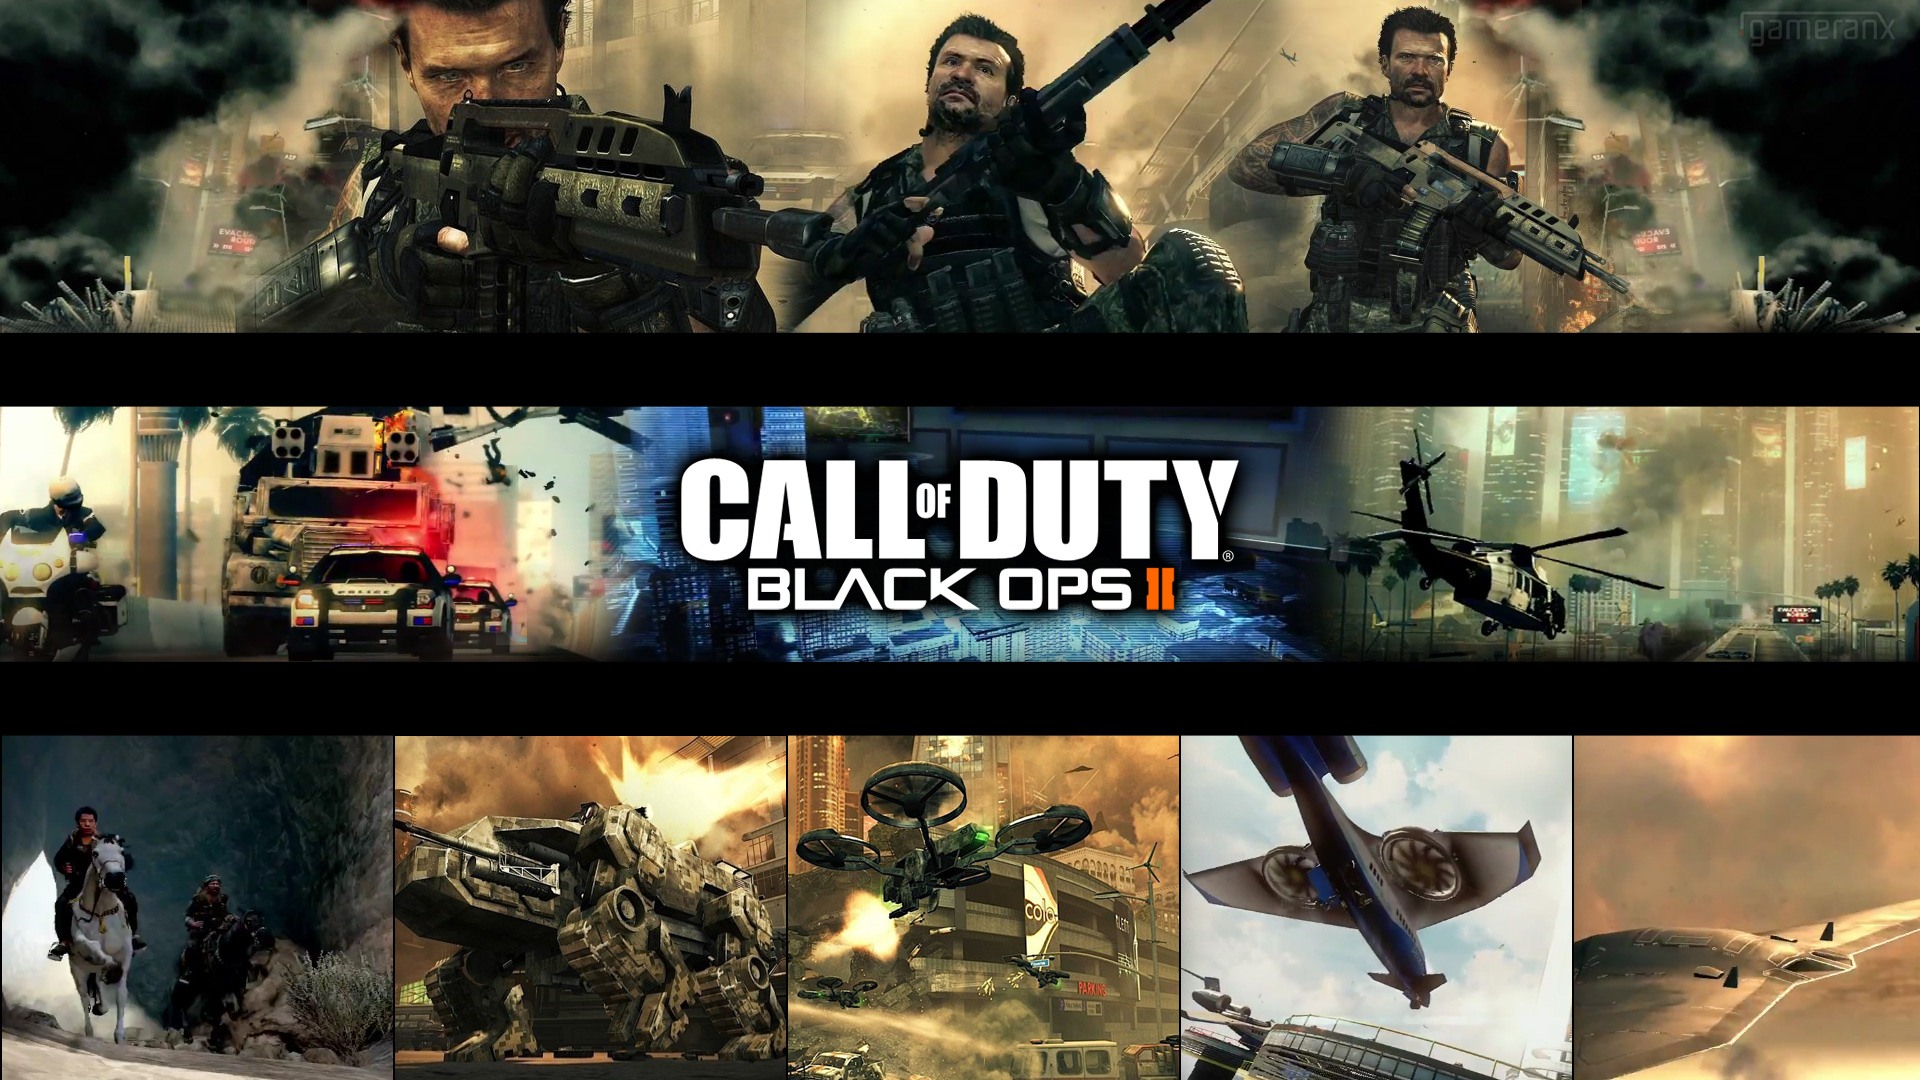 Call Of Duty: Black Ops Ii wallpapers for desktop, download free Call Of  Duty: Black Ops Ii pictures and backgrounds for PC 